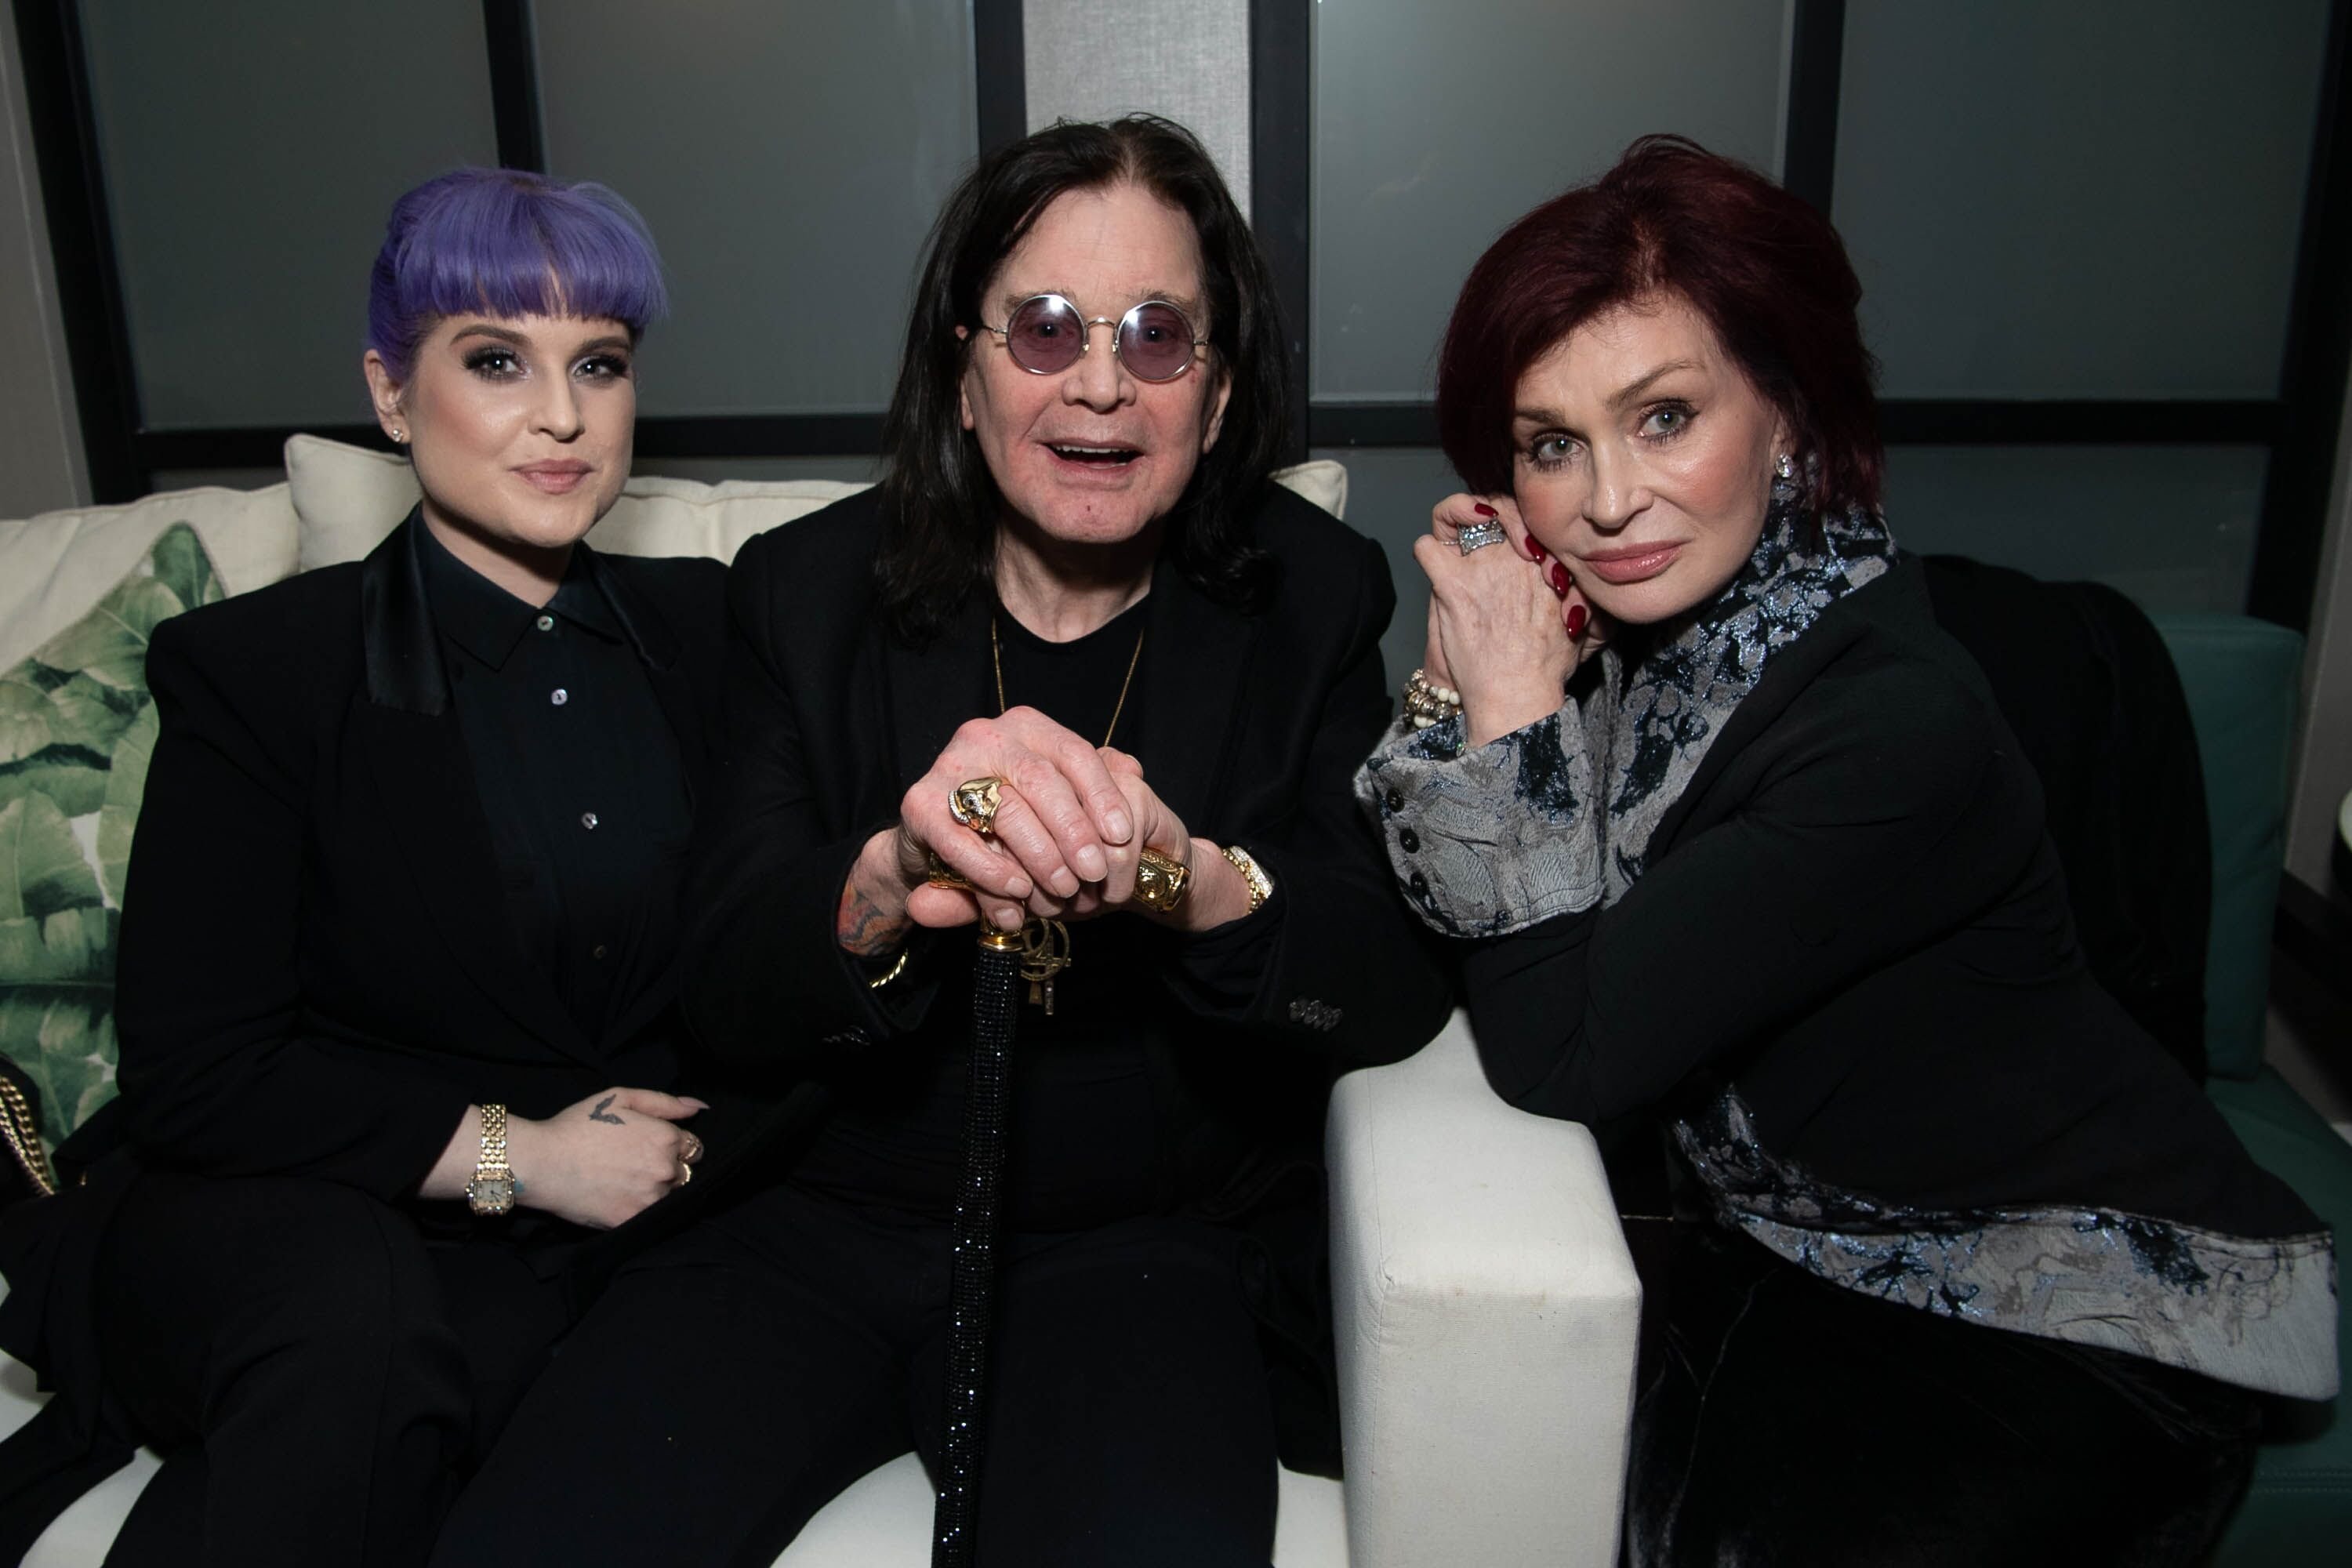 Kelly Osbourne, Ozzy Osbourne and Sharon Osbourne attend the after party for the special screening of Momentum Pictures' "A Million Little Pieces." | Source: Getty Images